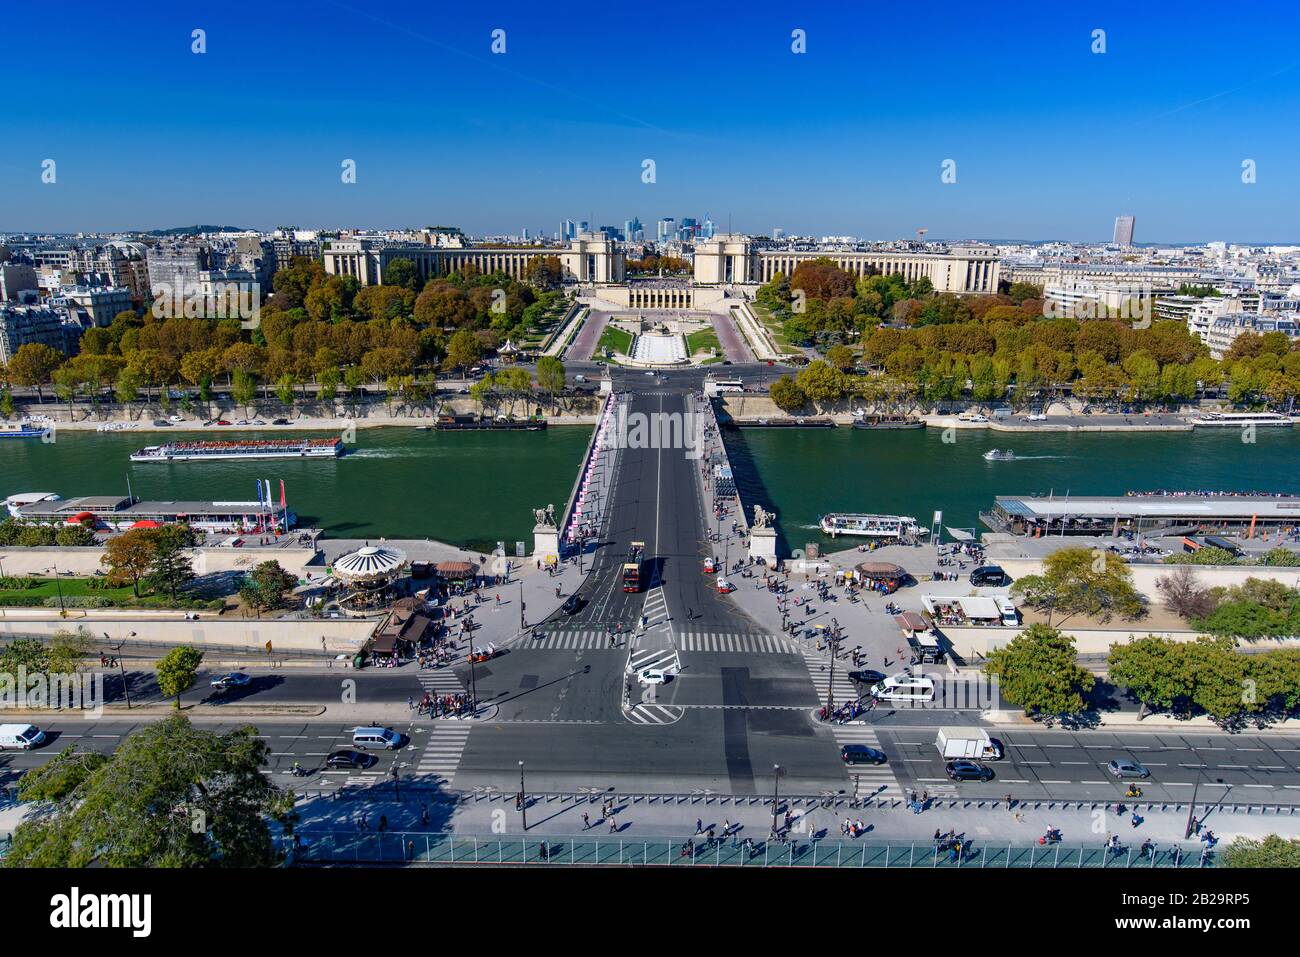 Aerial view of Palais de Chaillot, Seine river, and the skyline of Paris city from Eiffel Tower, Paris, France, Europe Stock Photo